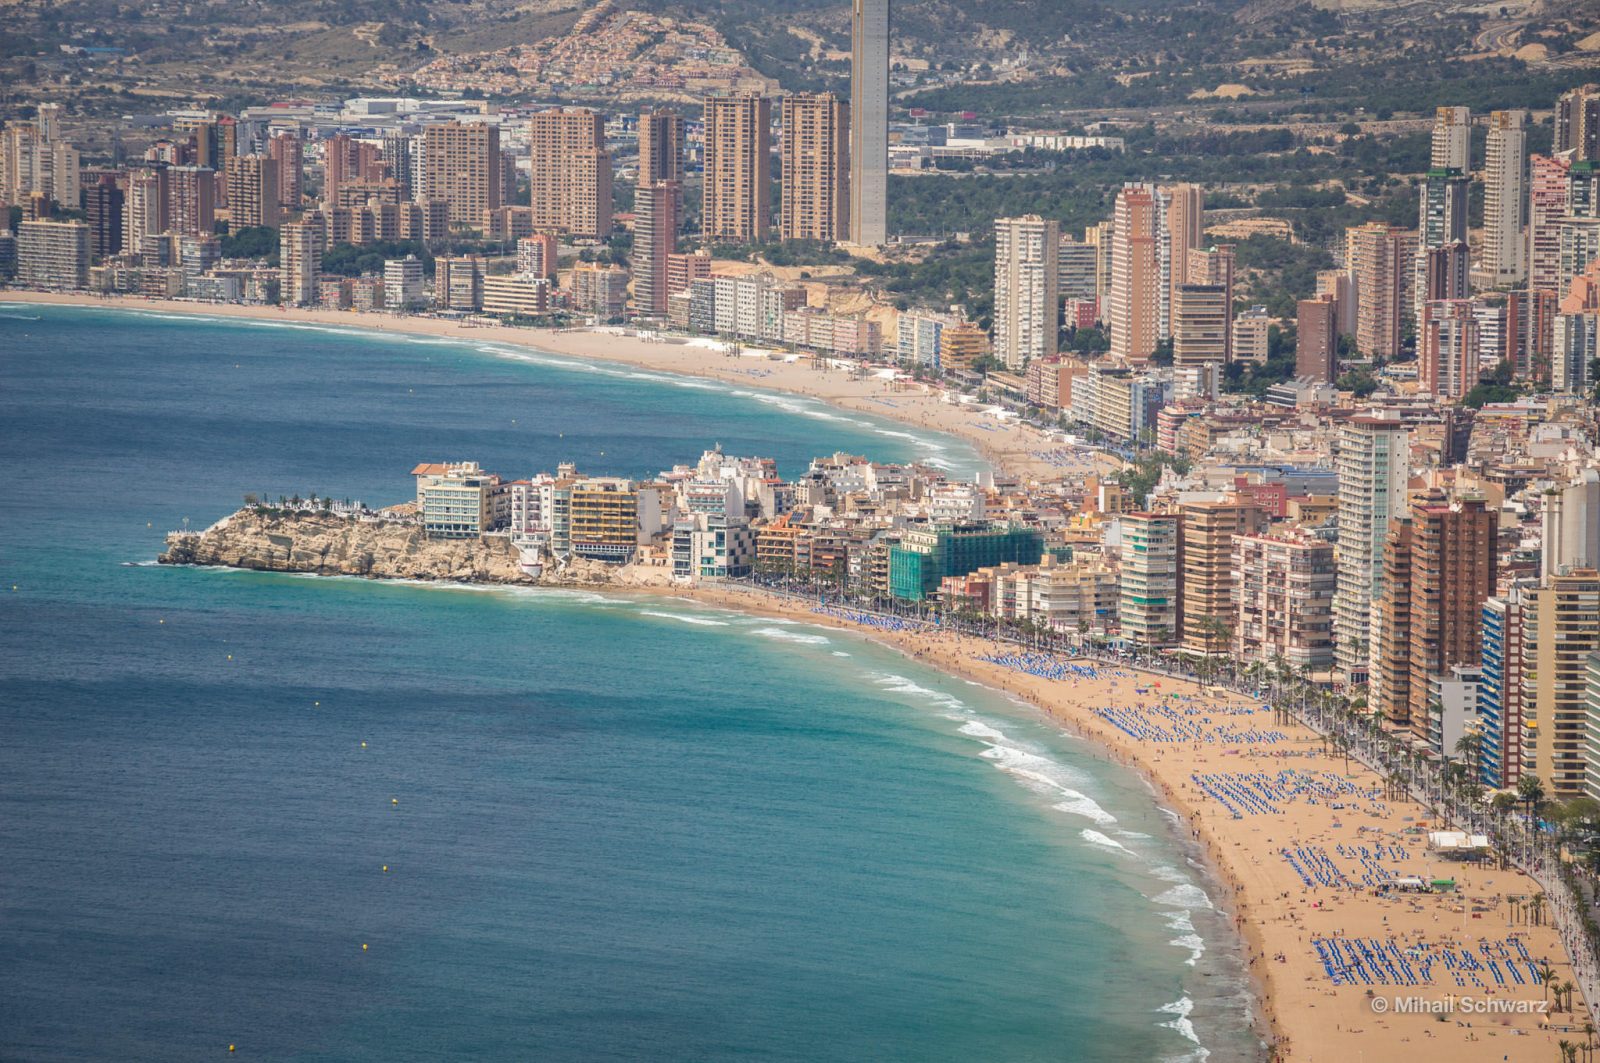 In the foreground is Levante beach, behind the ledge is Poniente beach